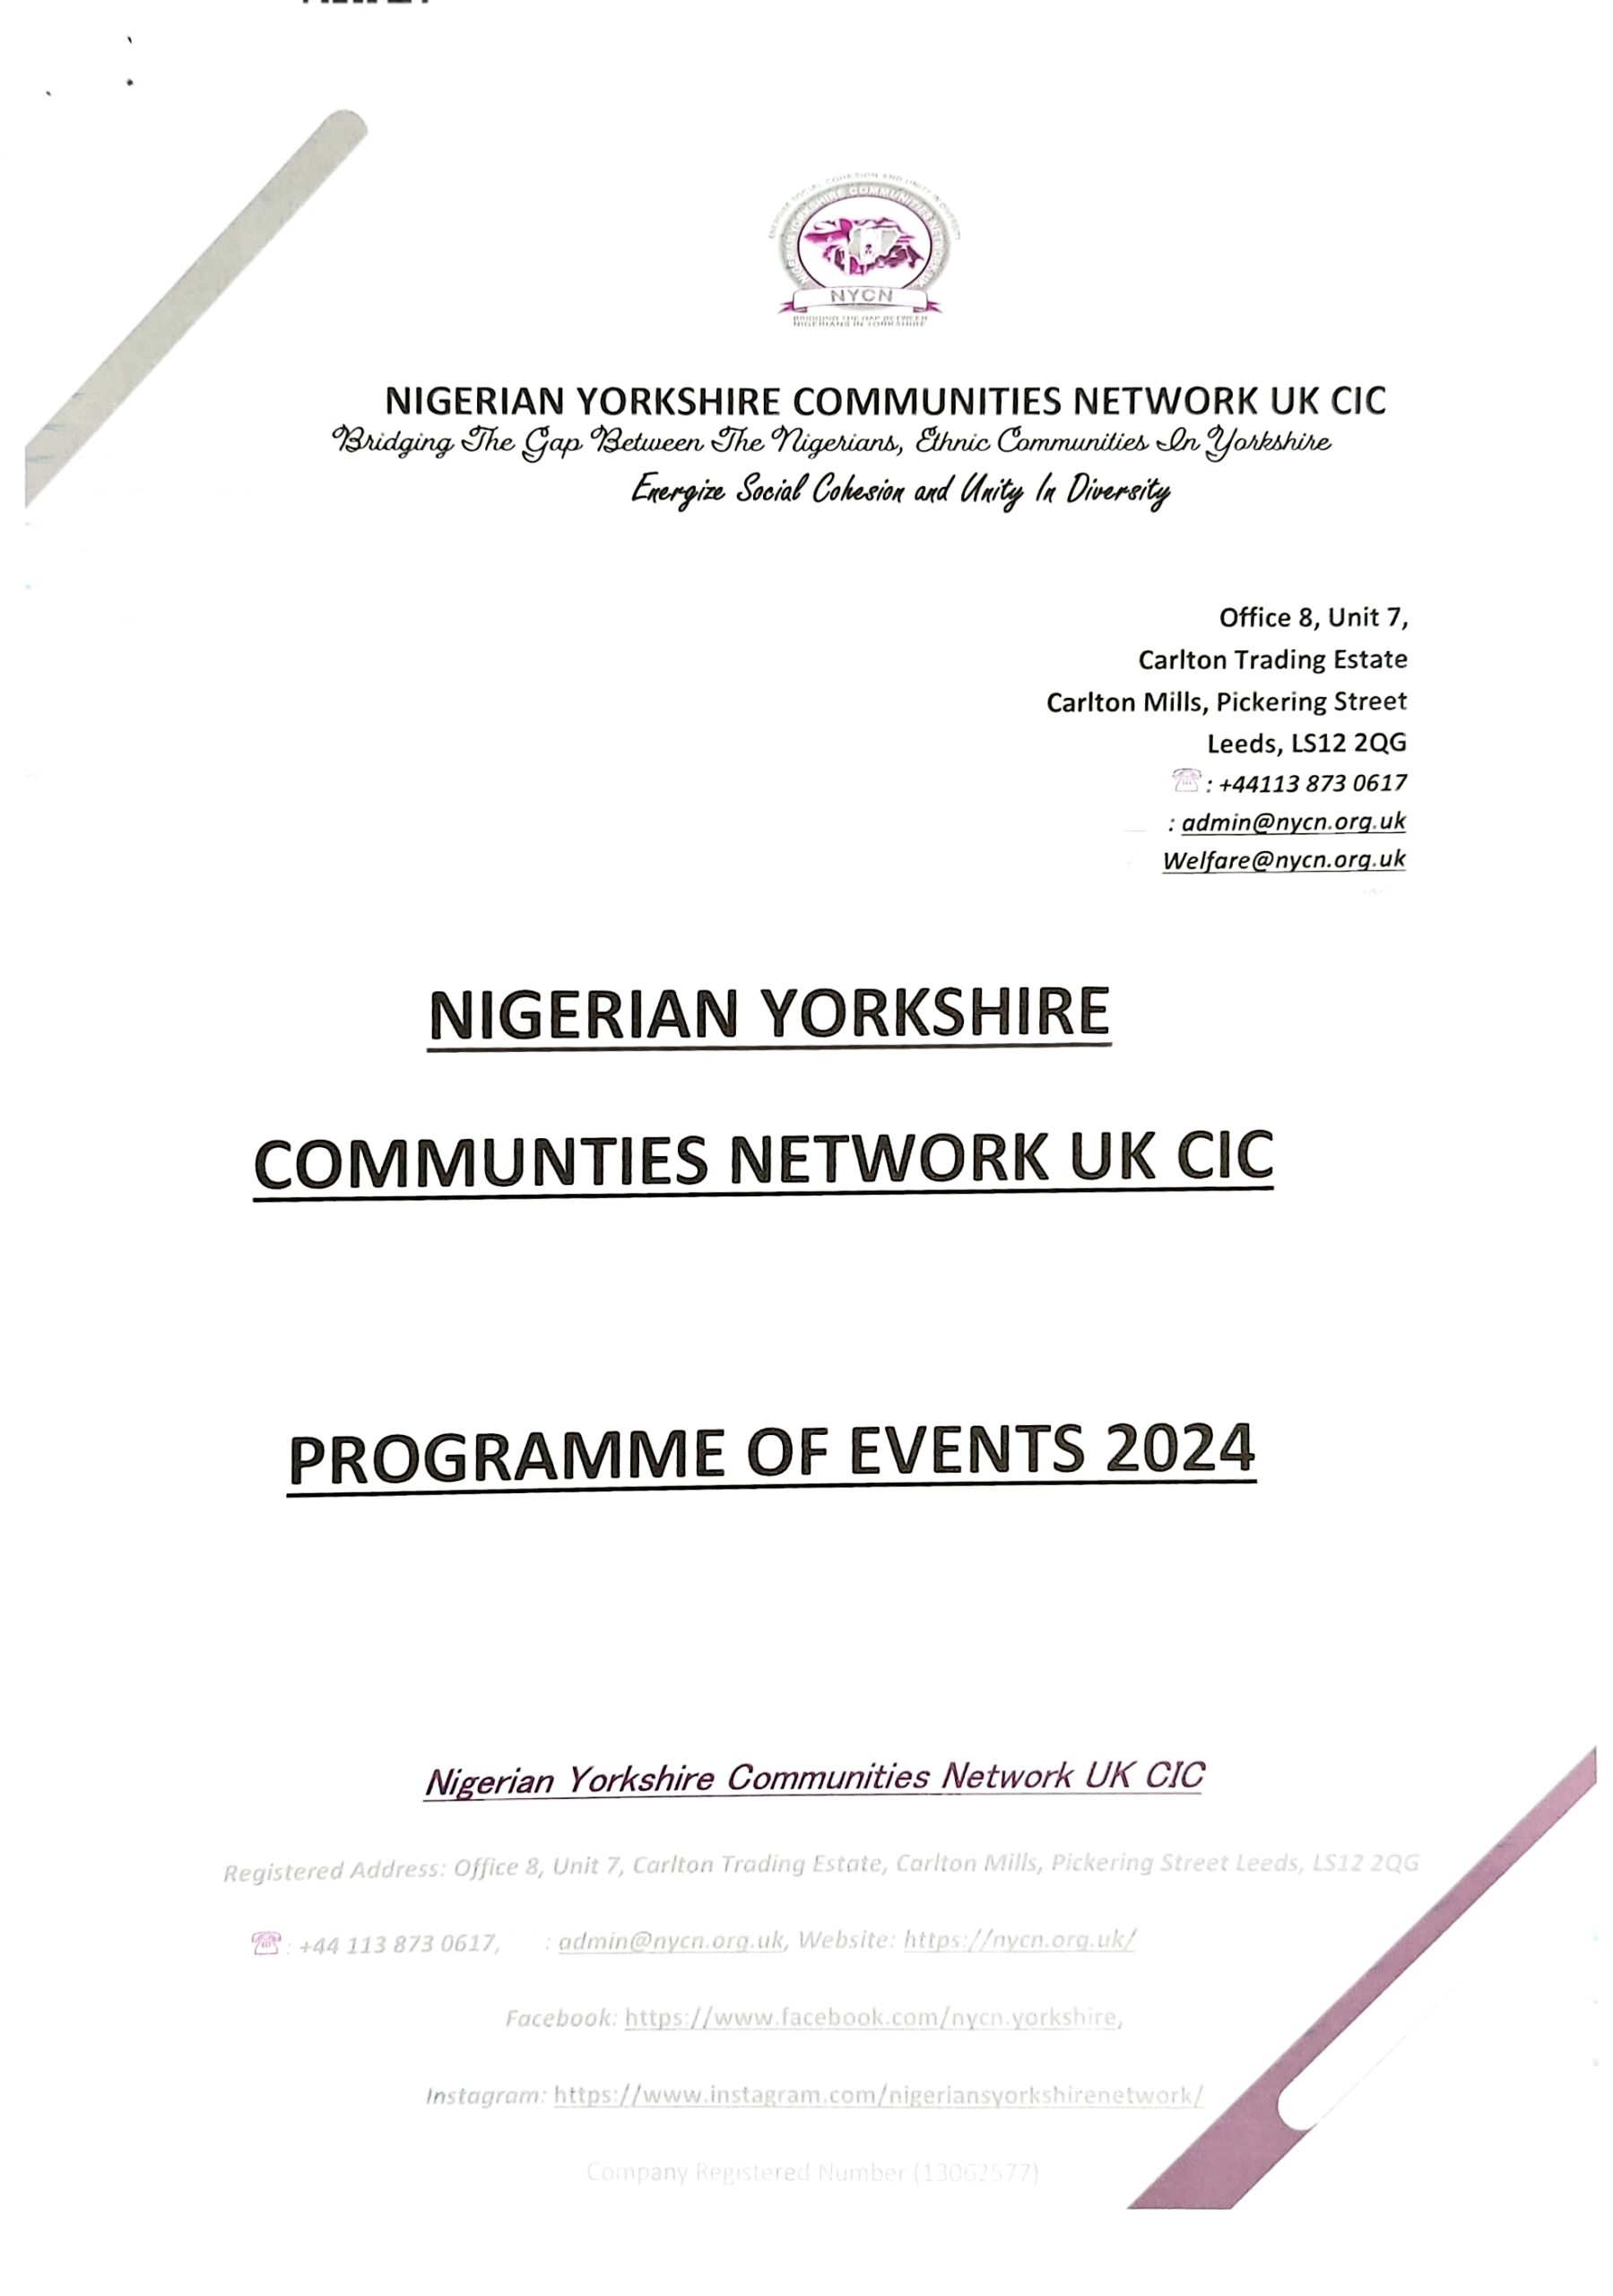 NYCN PROGRAMME OF EVENTS 2024